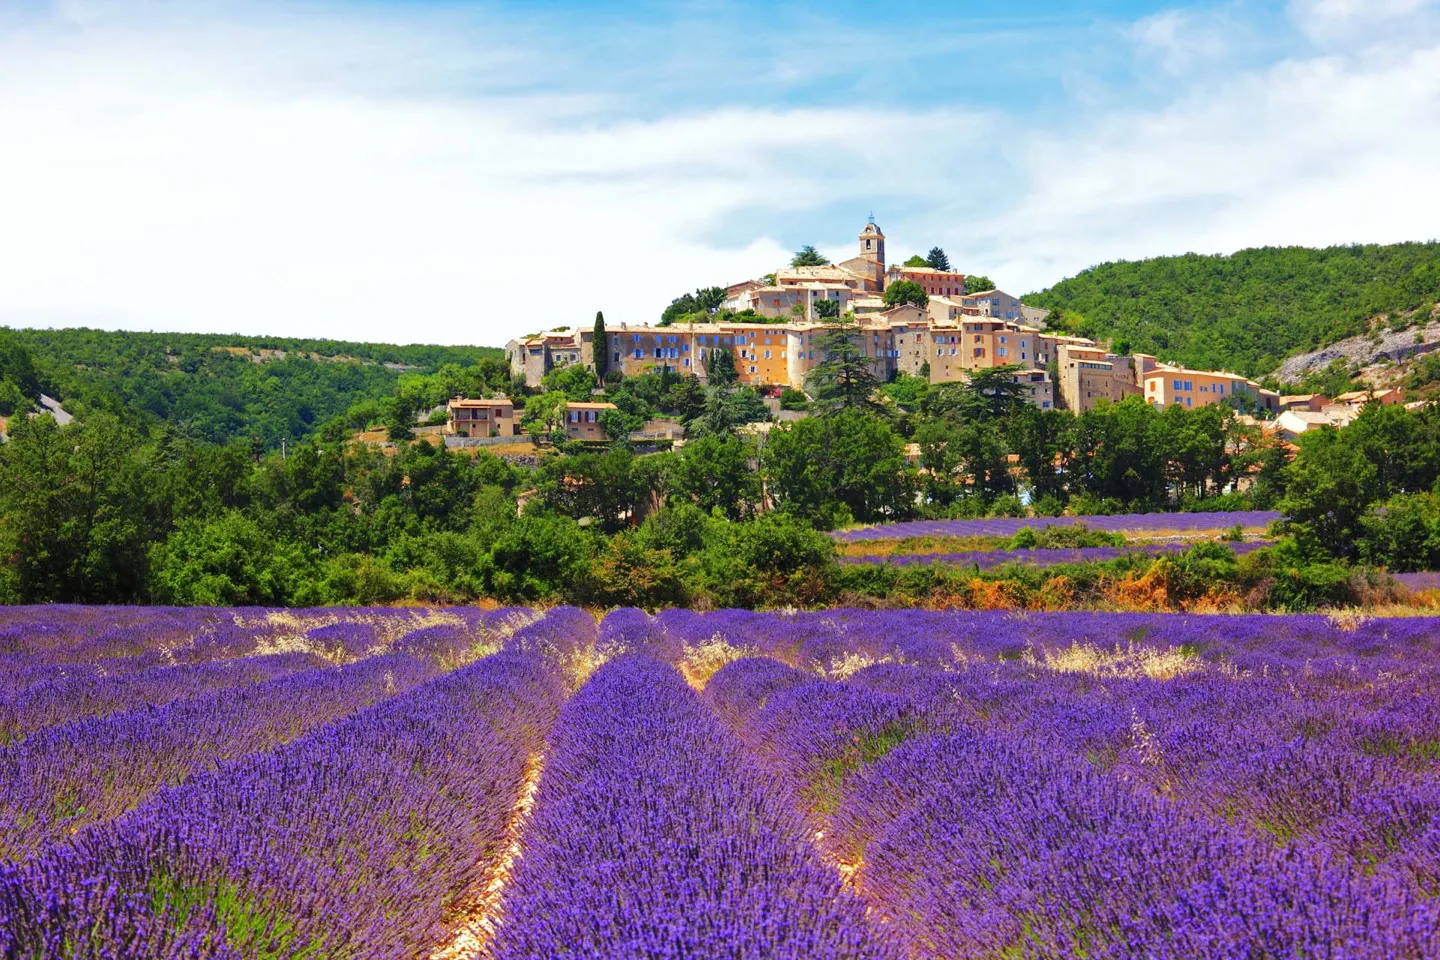 Experience the lavendar fields of Provence in the supercar of your choice